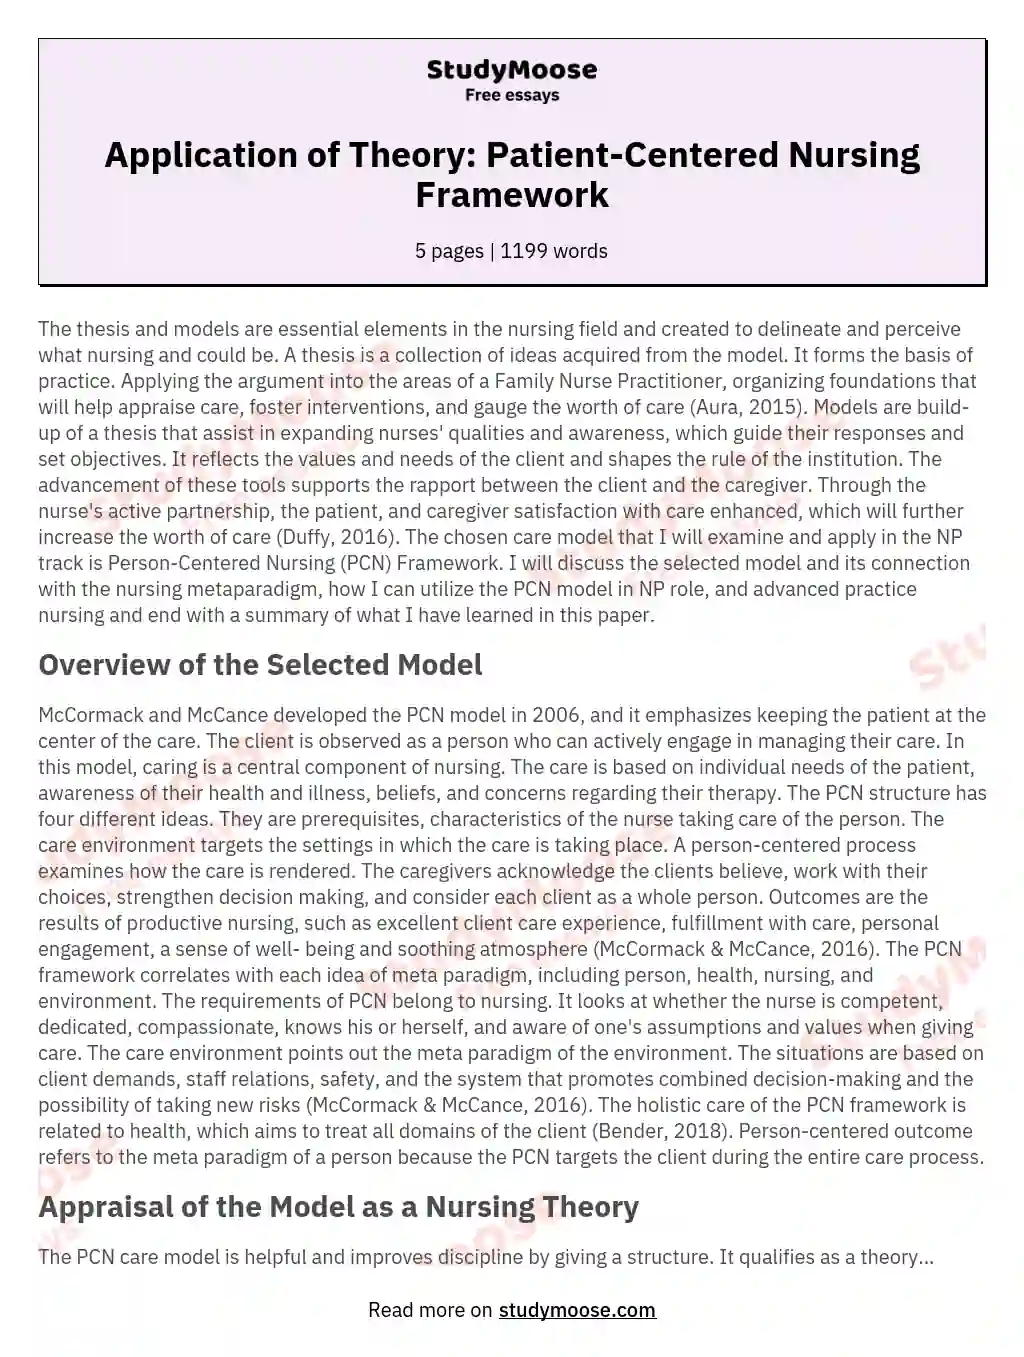 Application of Theory: Patient-Centered Nursing Framework